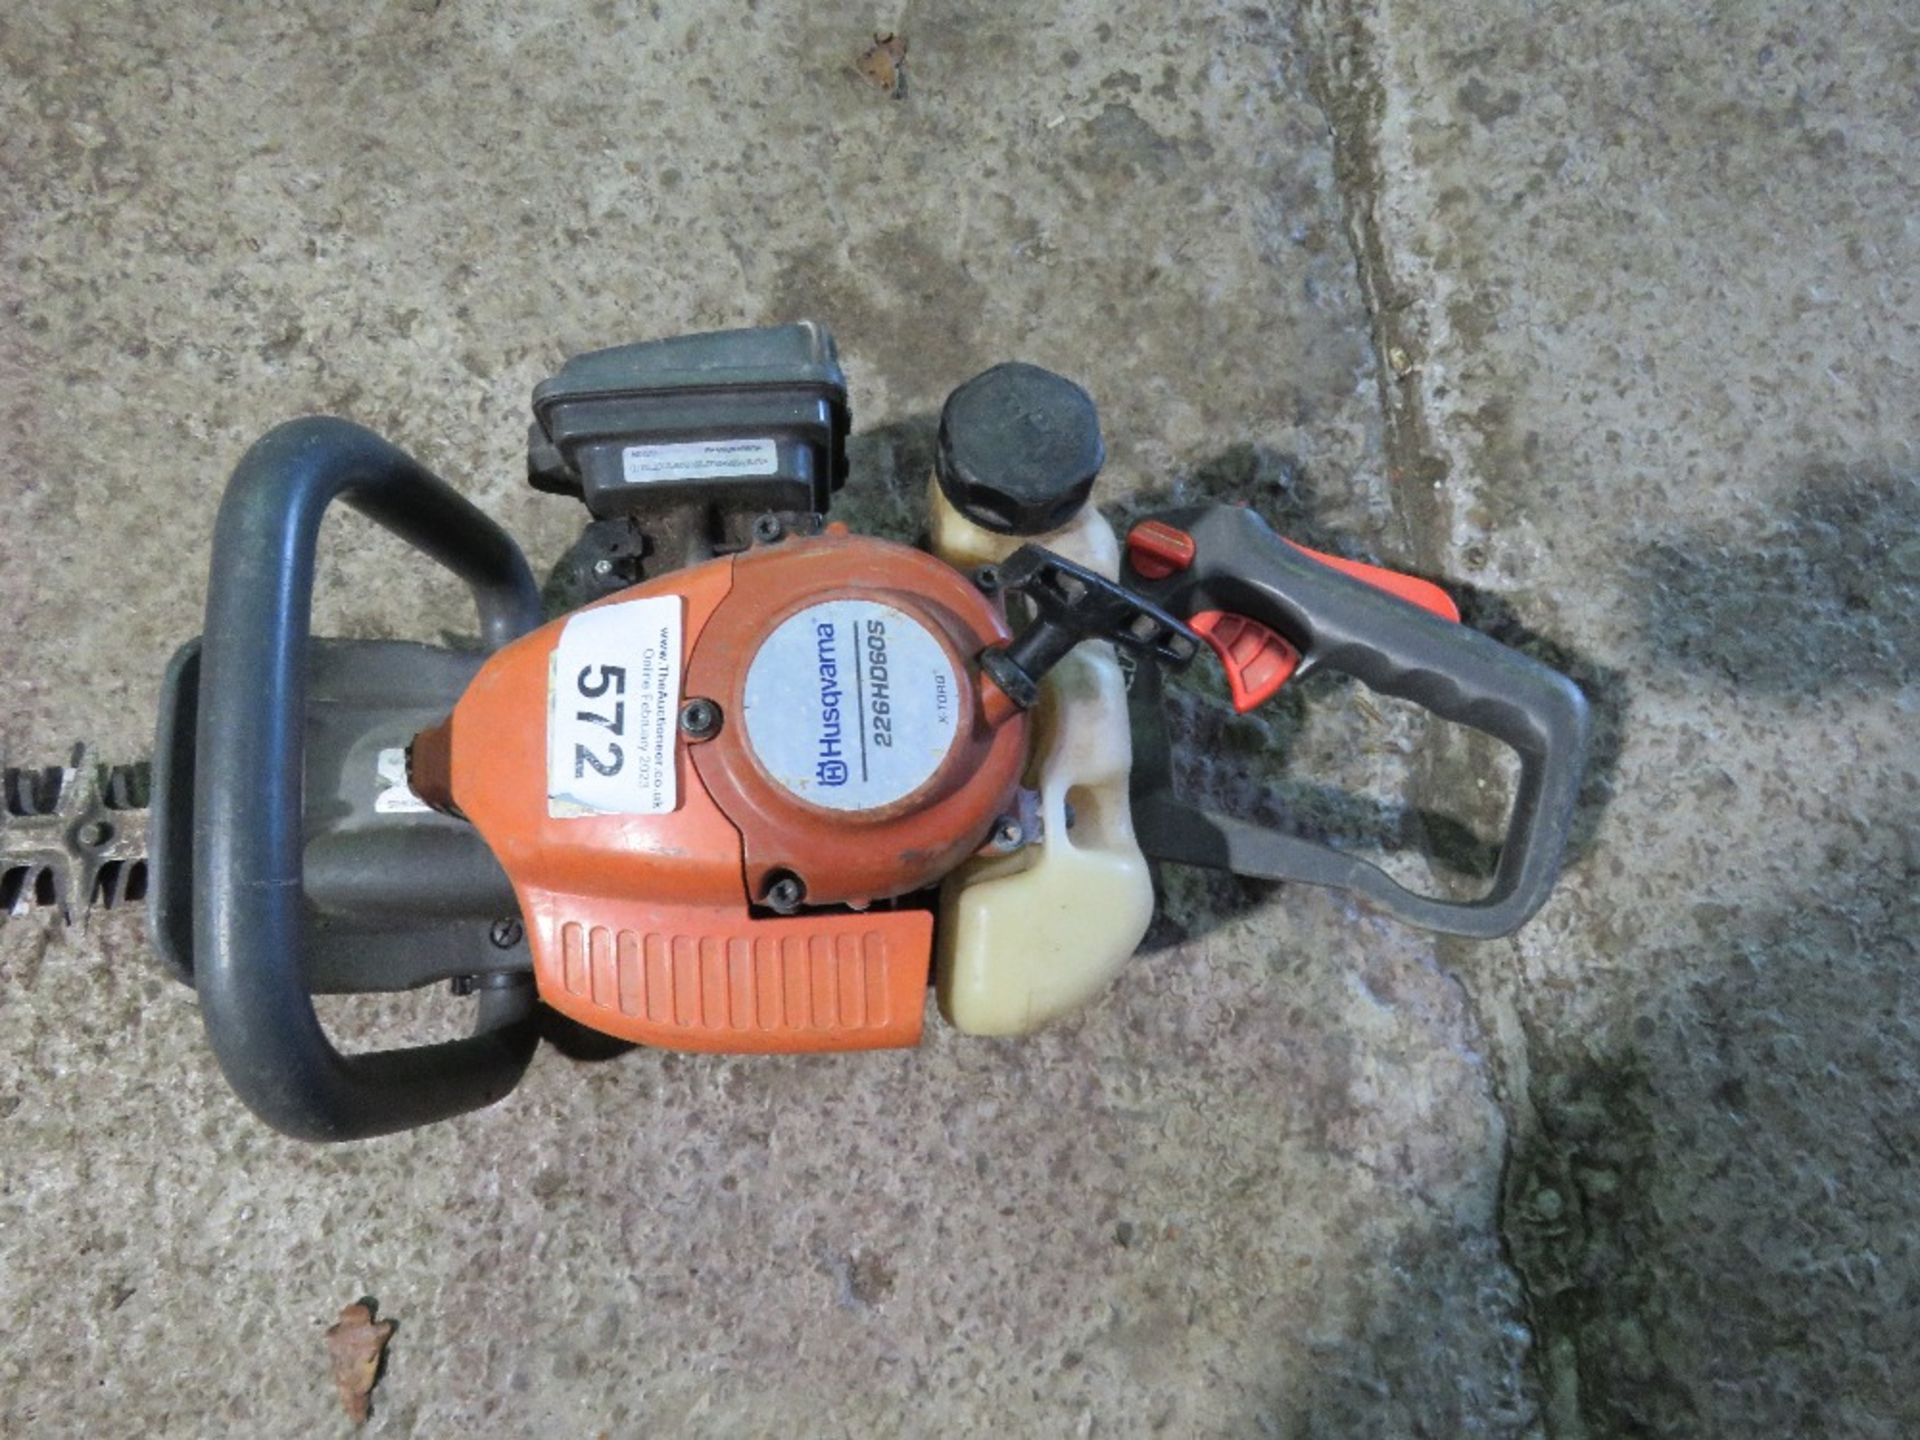 HUSQVARNA PETROL HEDGE CUTTER. THIS LOT IS SOLD UNDER THE AUCTIONEERS MARGIN SCHEME, THEREFORE NO - Image 2 of 5